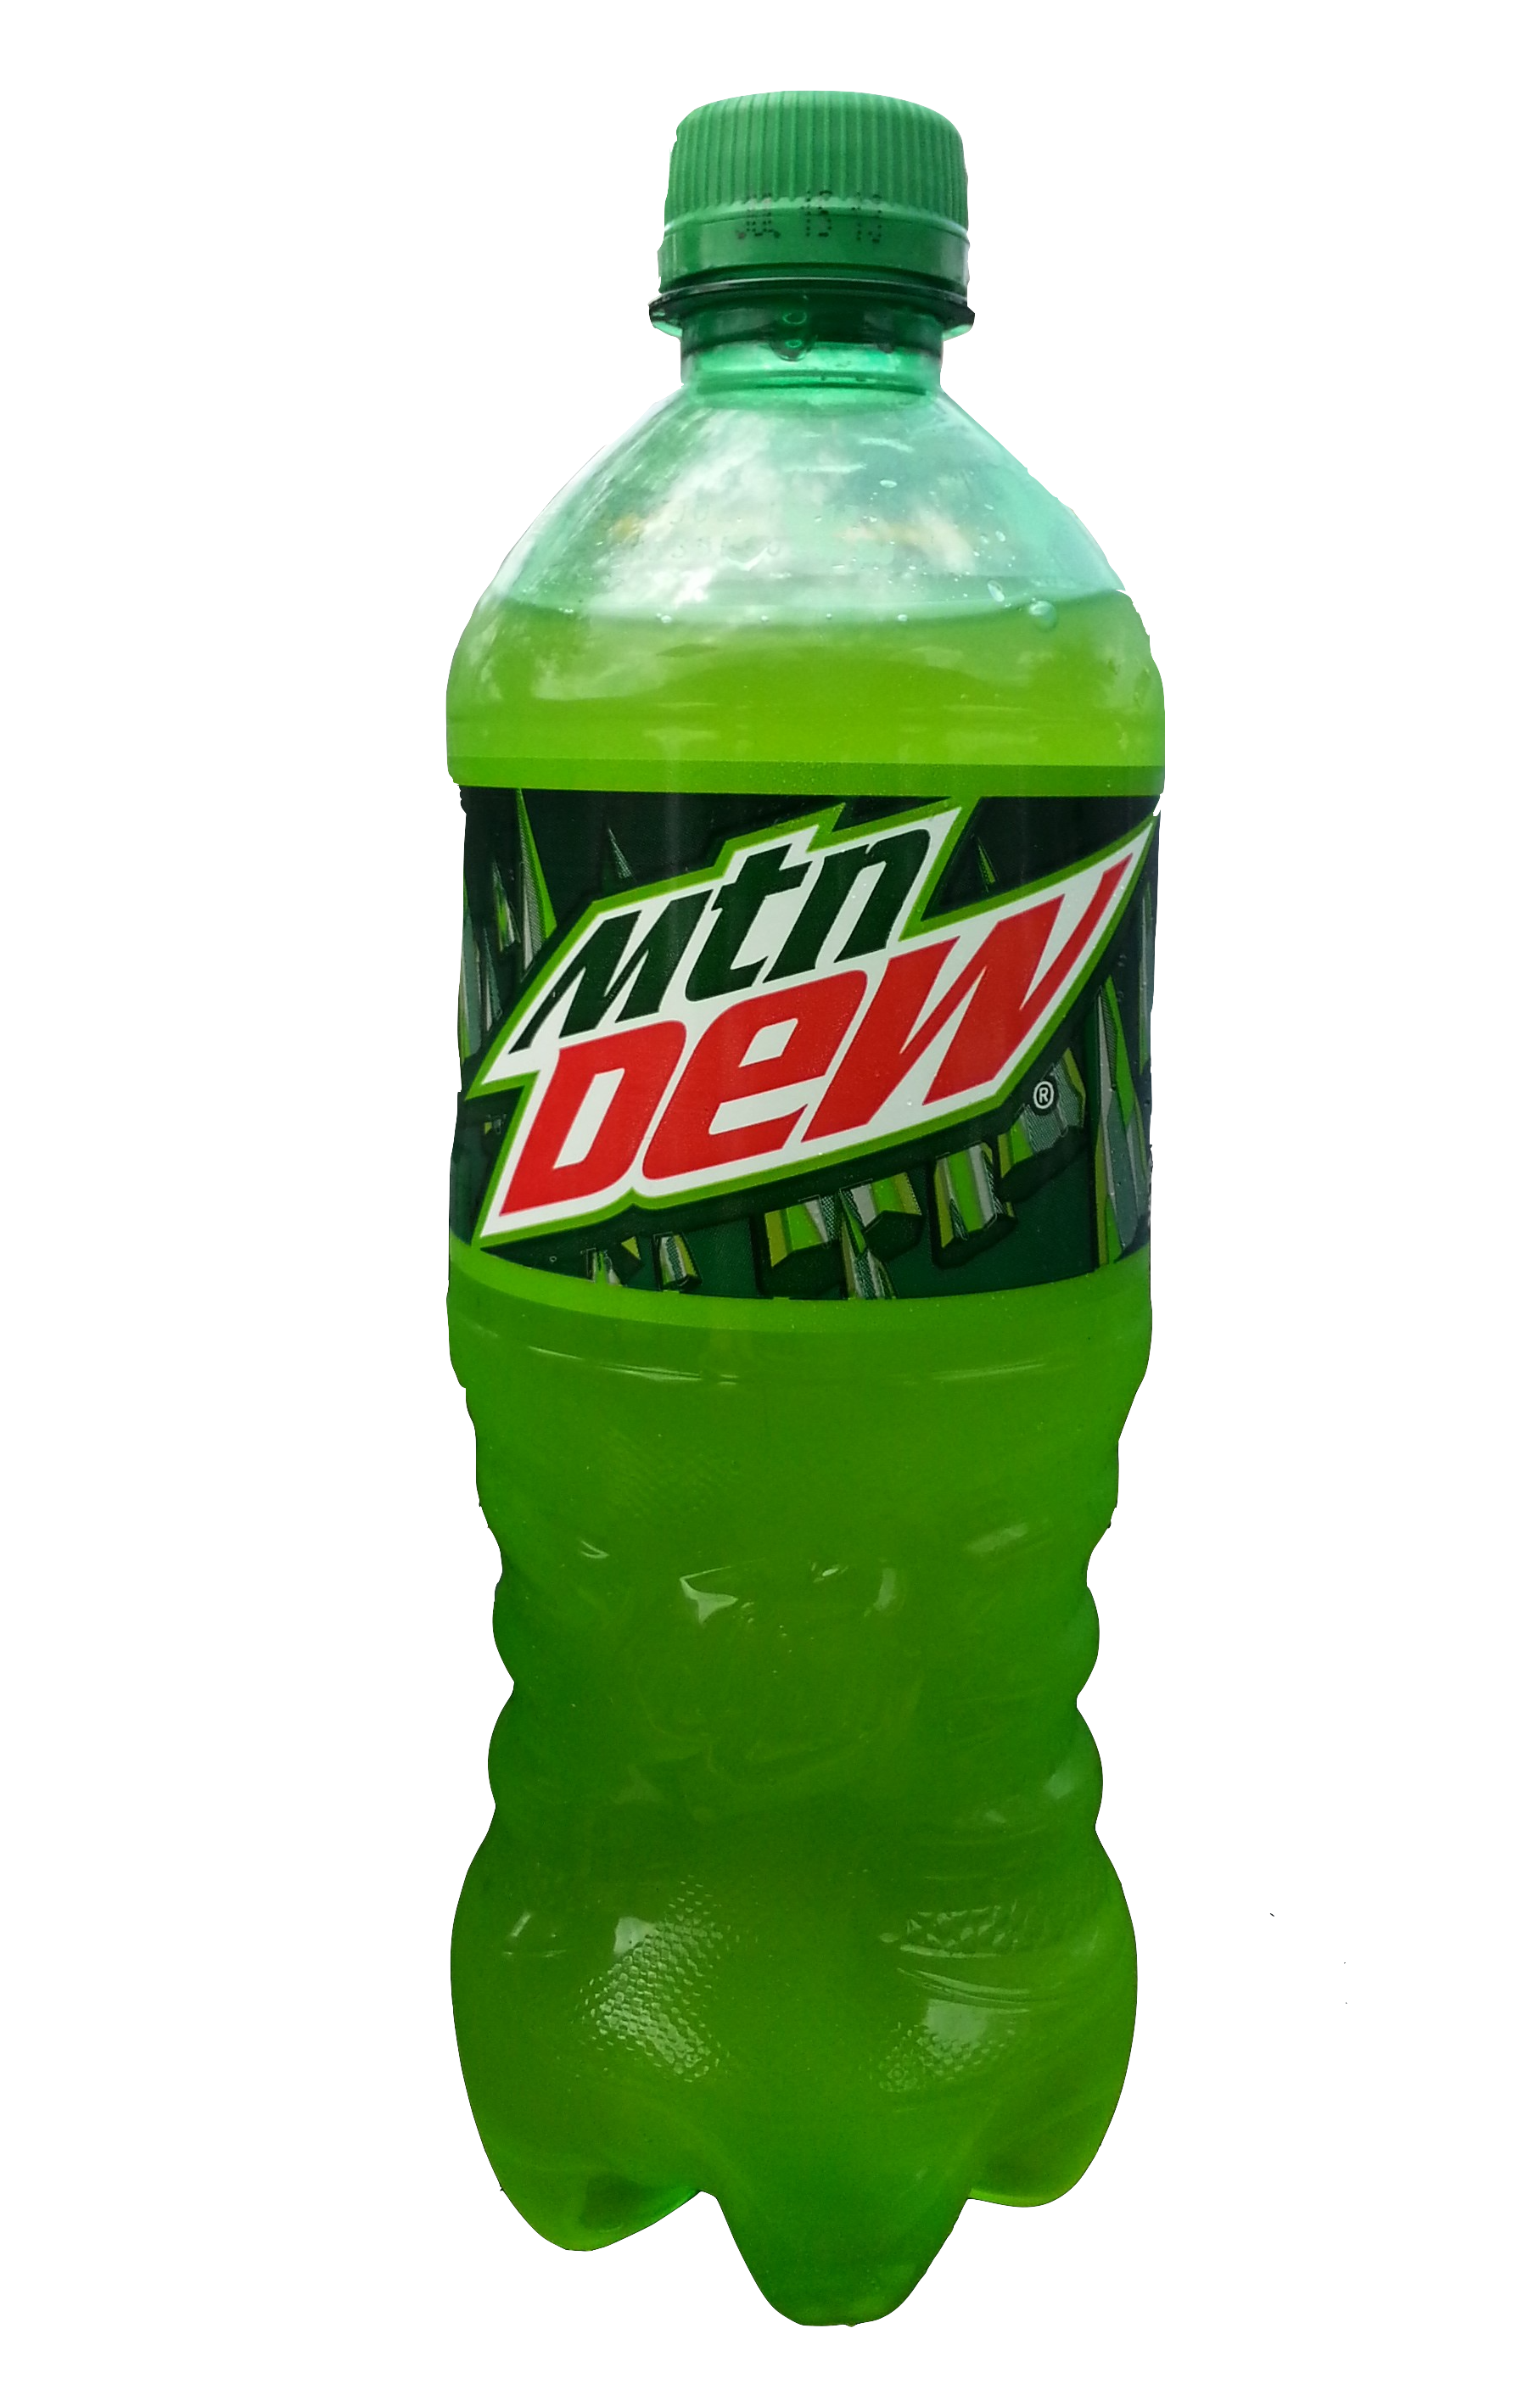 mountain-dew-may-have-just-launched-the-smartest-marketing-campaign-of